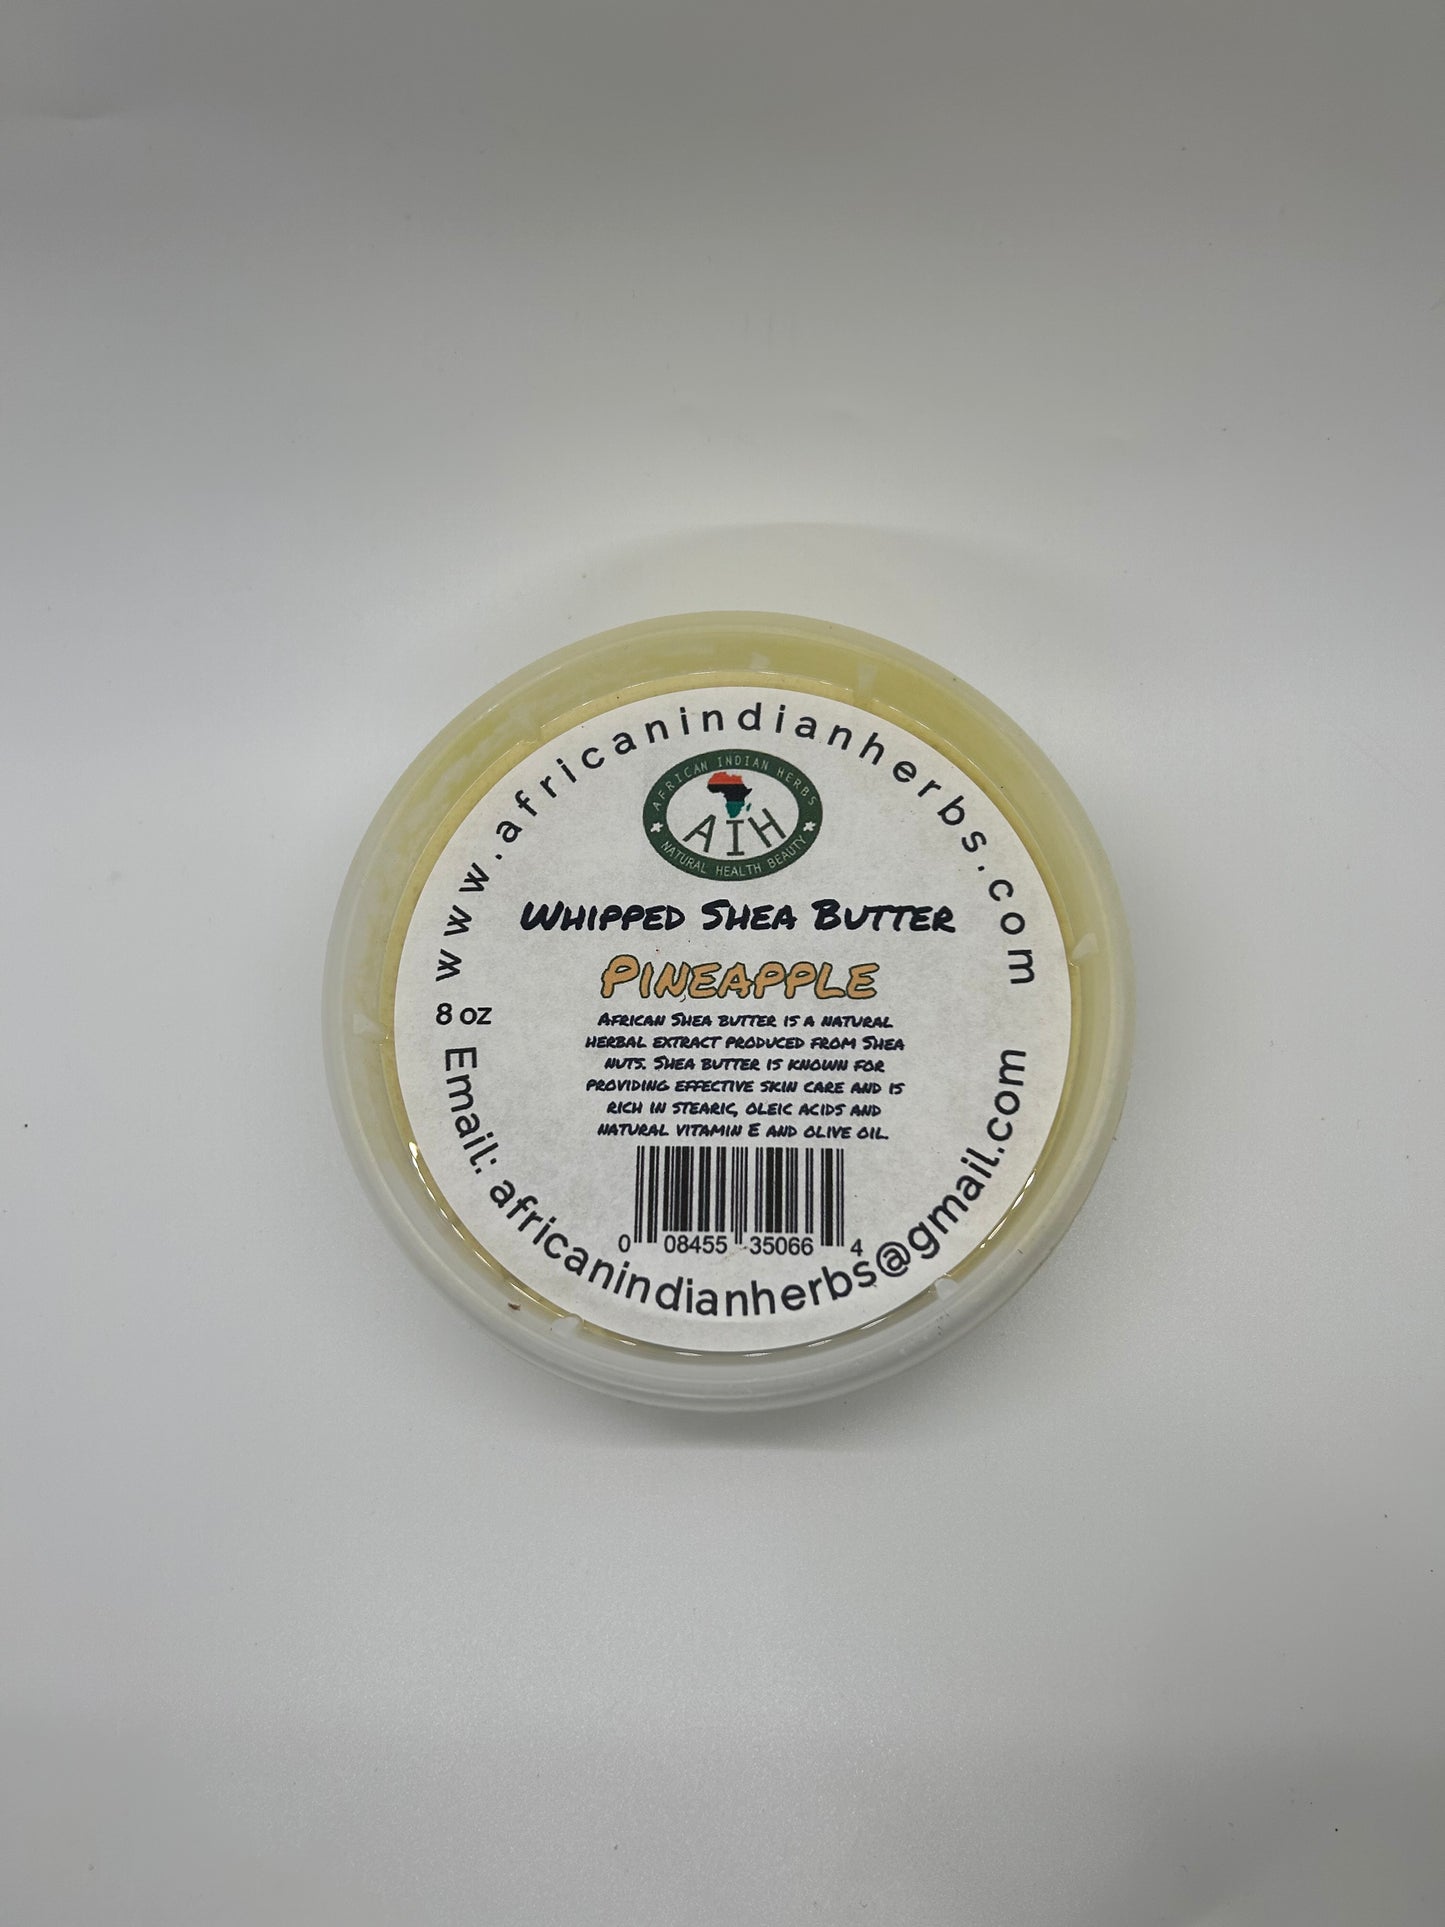 Pineapple whipped shea butter